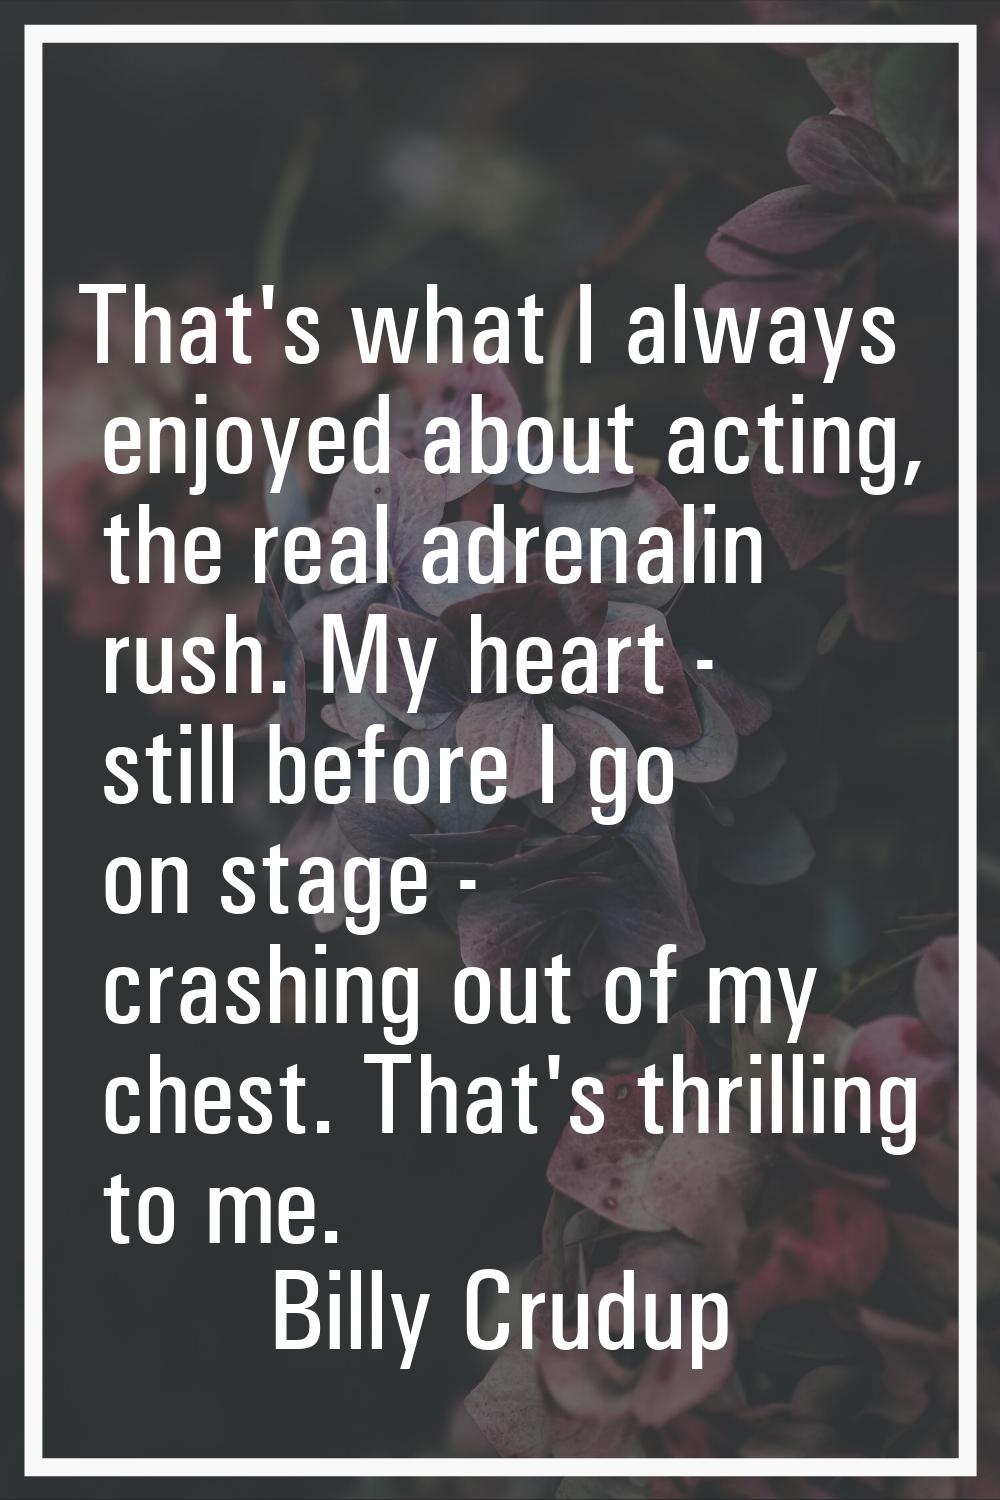 That's what I always enjoyed about acting, the real adrenalin rush. My heart - still before I go on